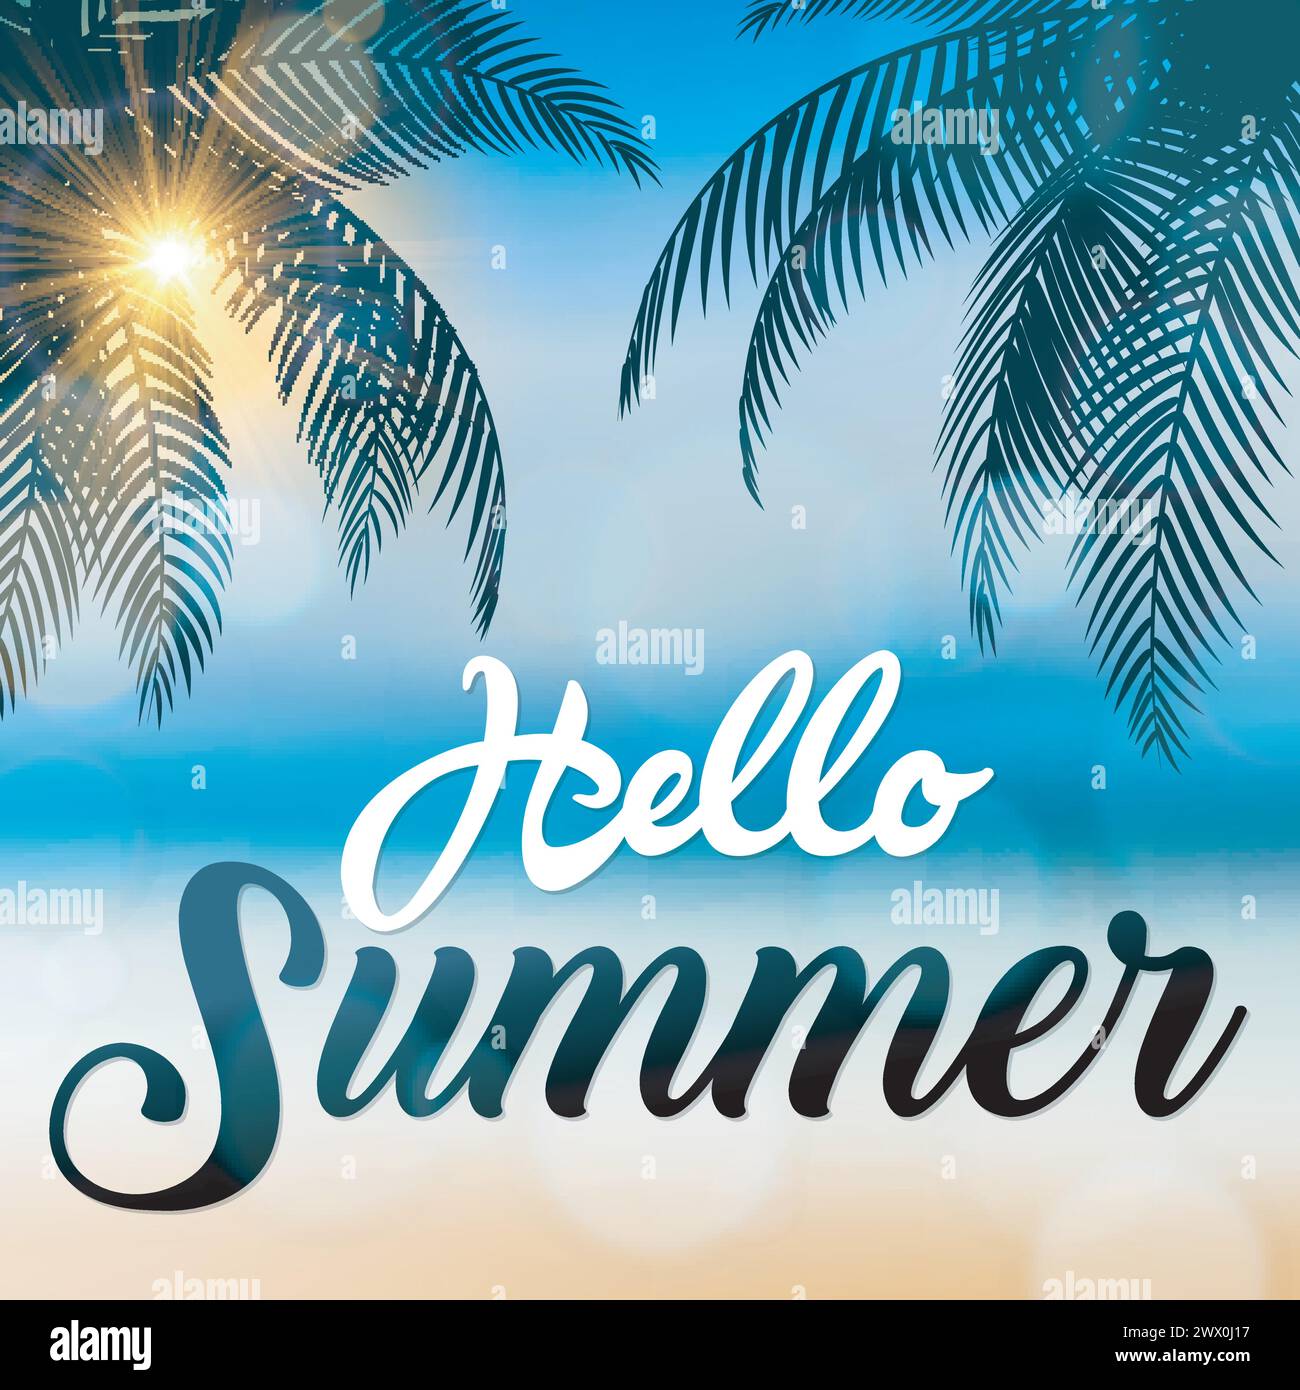 Hello Summer Sign, with Coconut Trees At The Seaside, Suitable For Summer Holiday and Beach Party, Vector Illustration Stock Vector